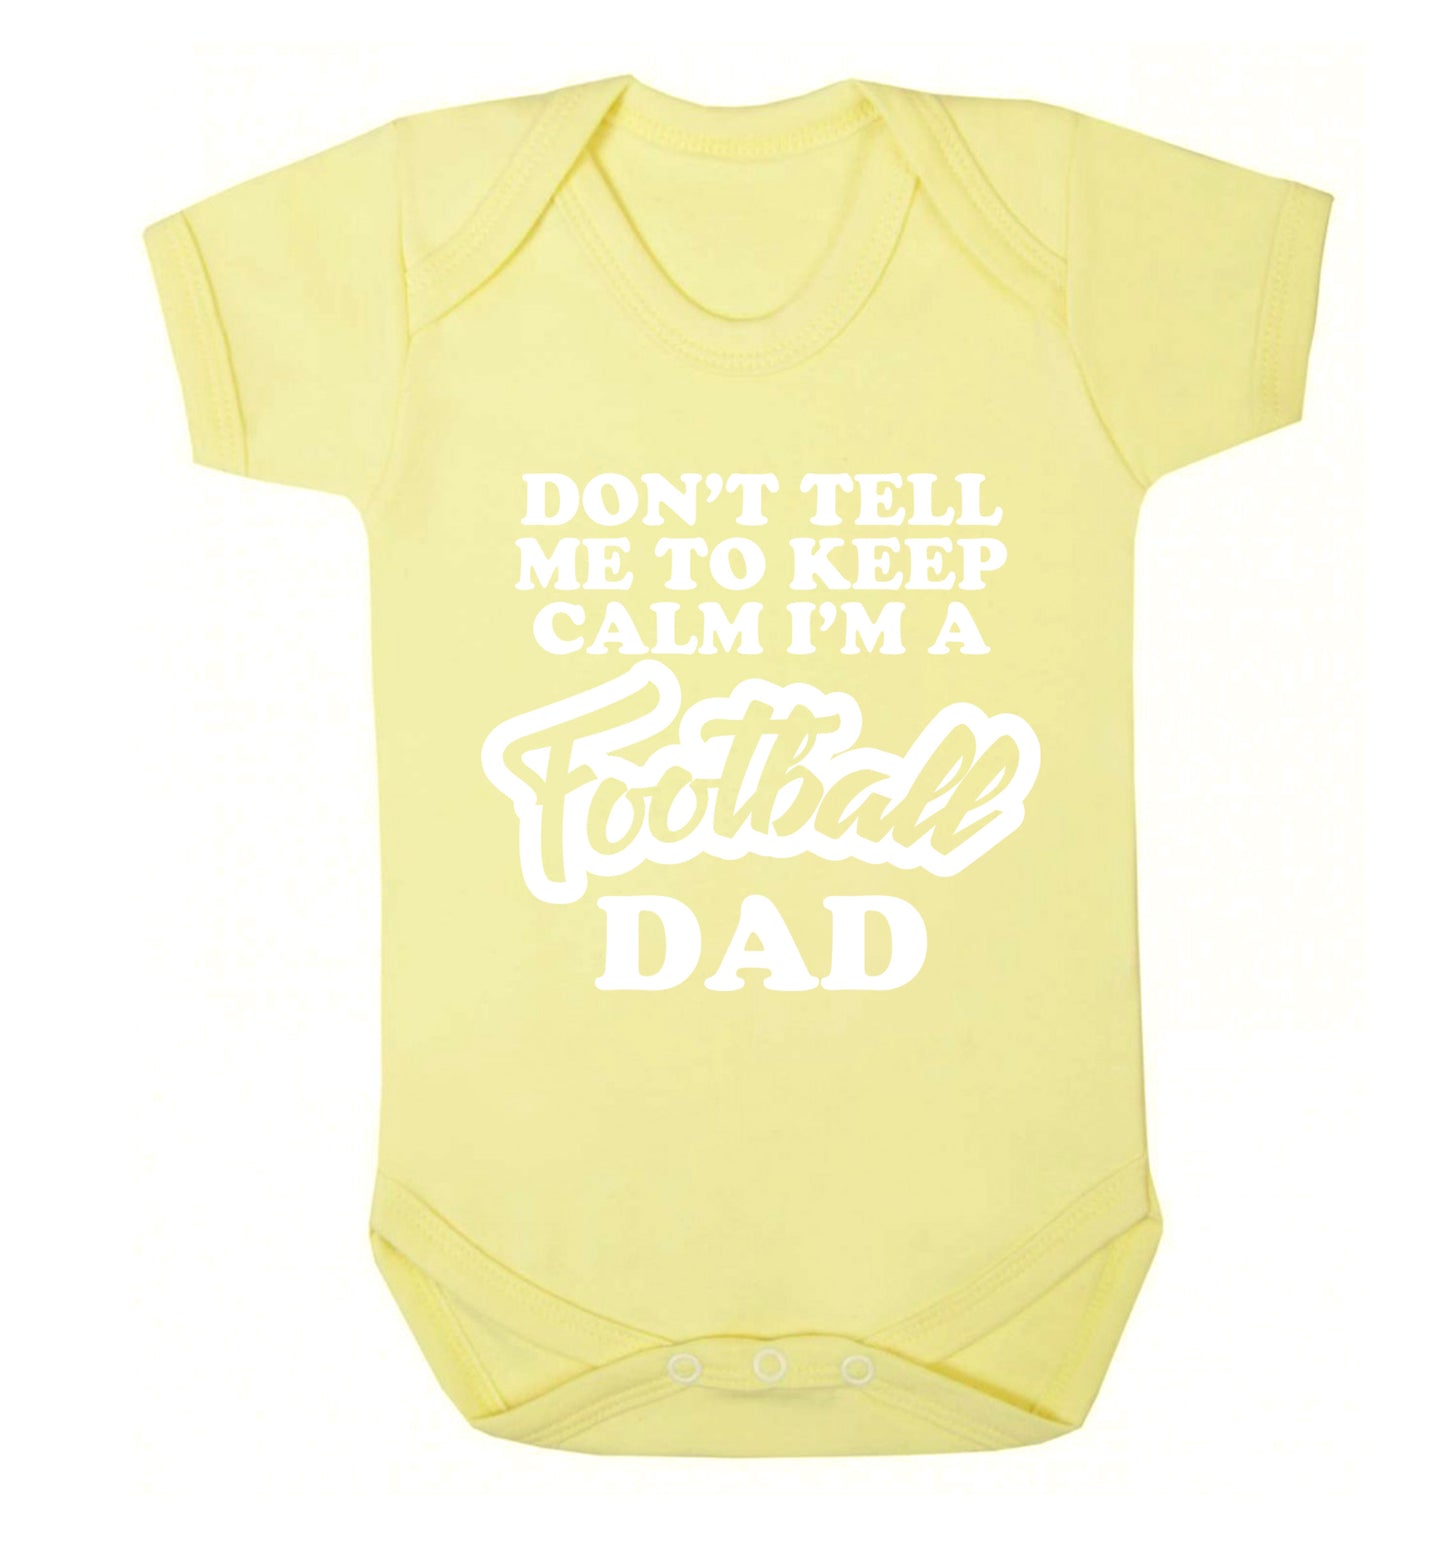 Don't tell me to keep calm I'm a football dad Baby Vest pale yellow 18-24 months